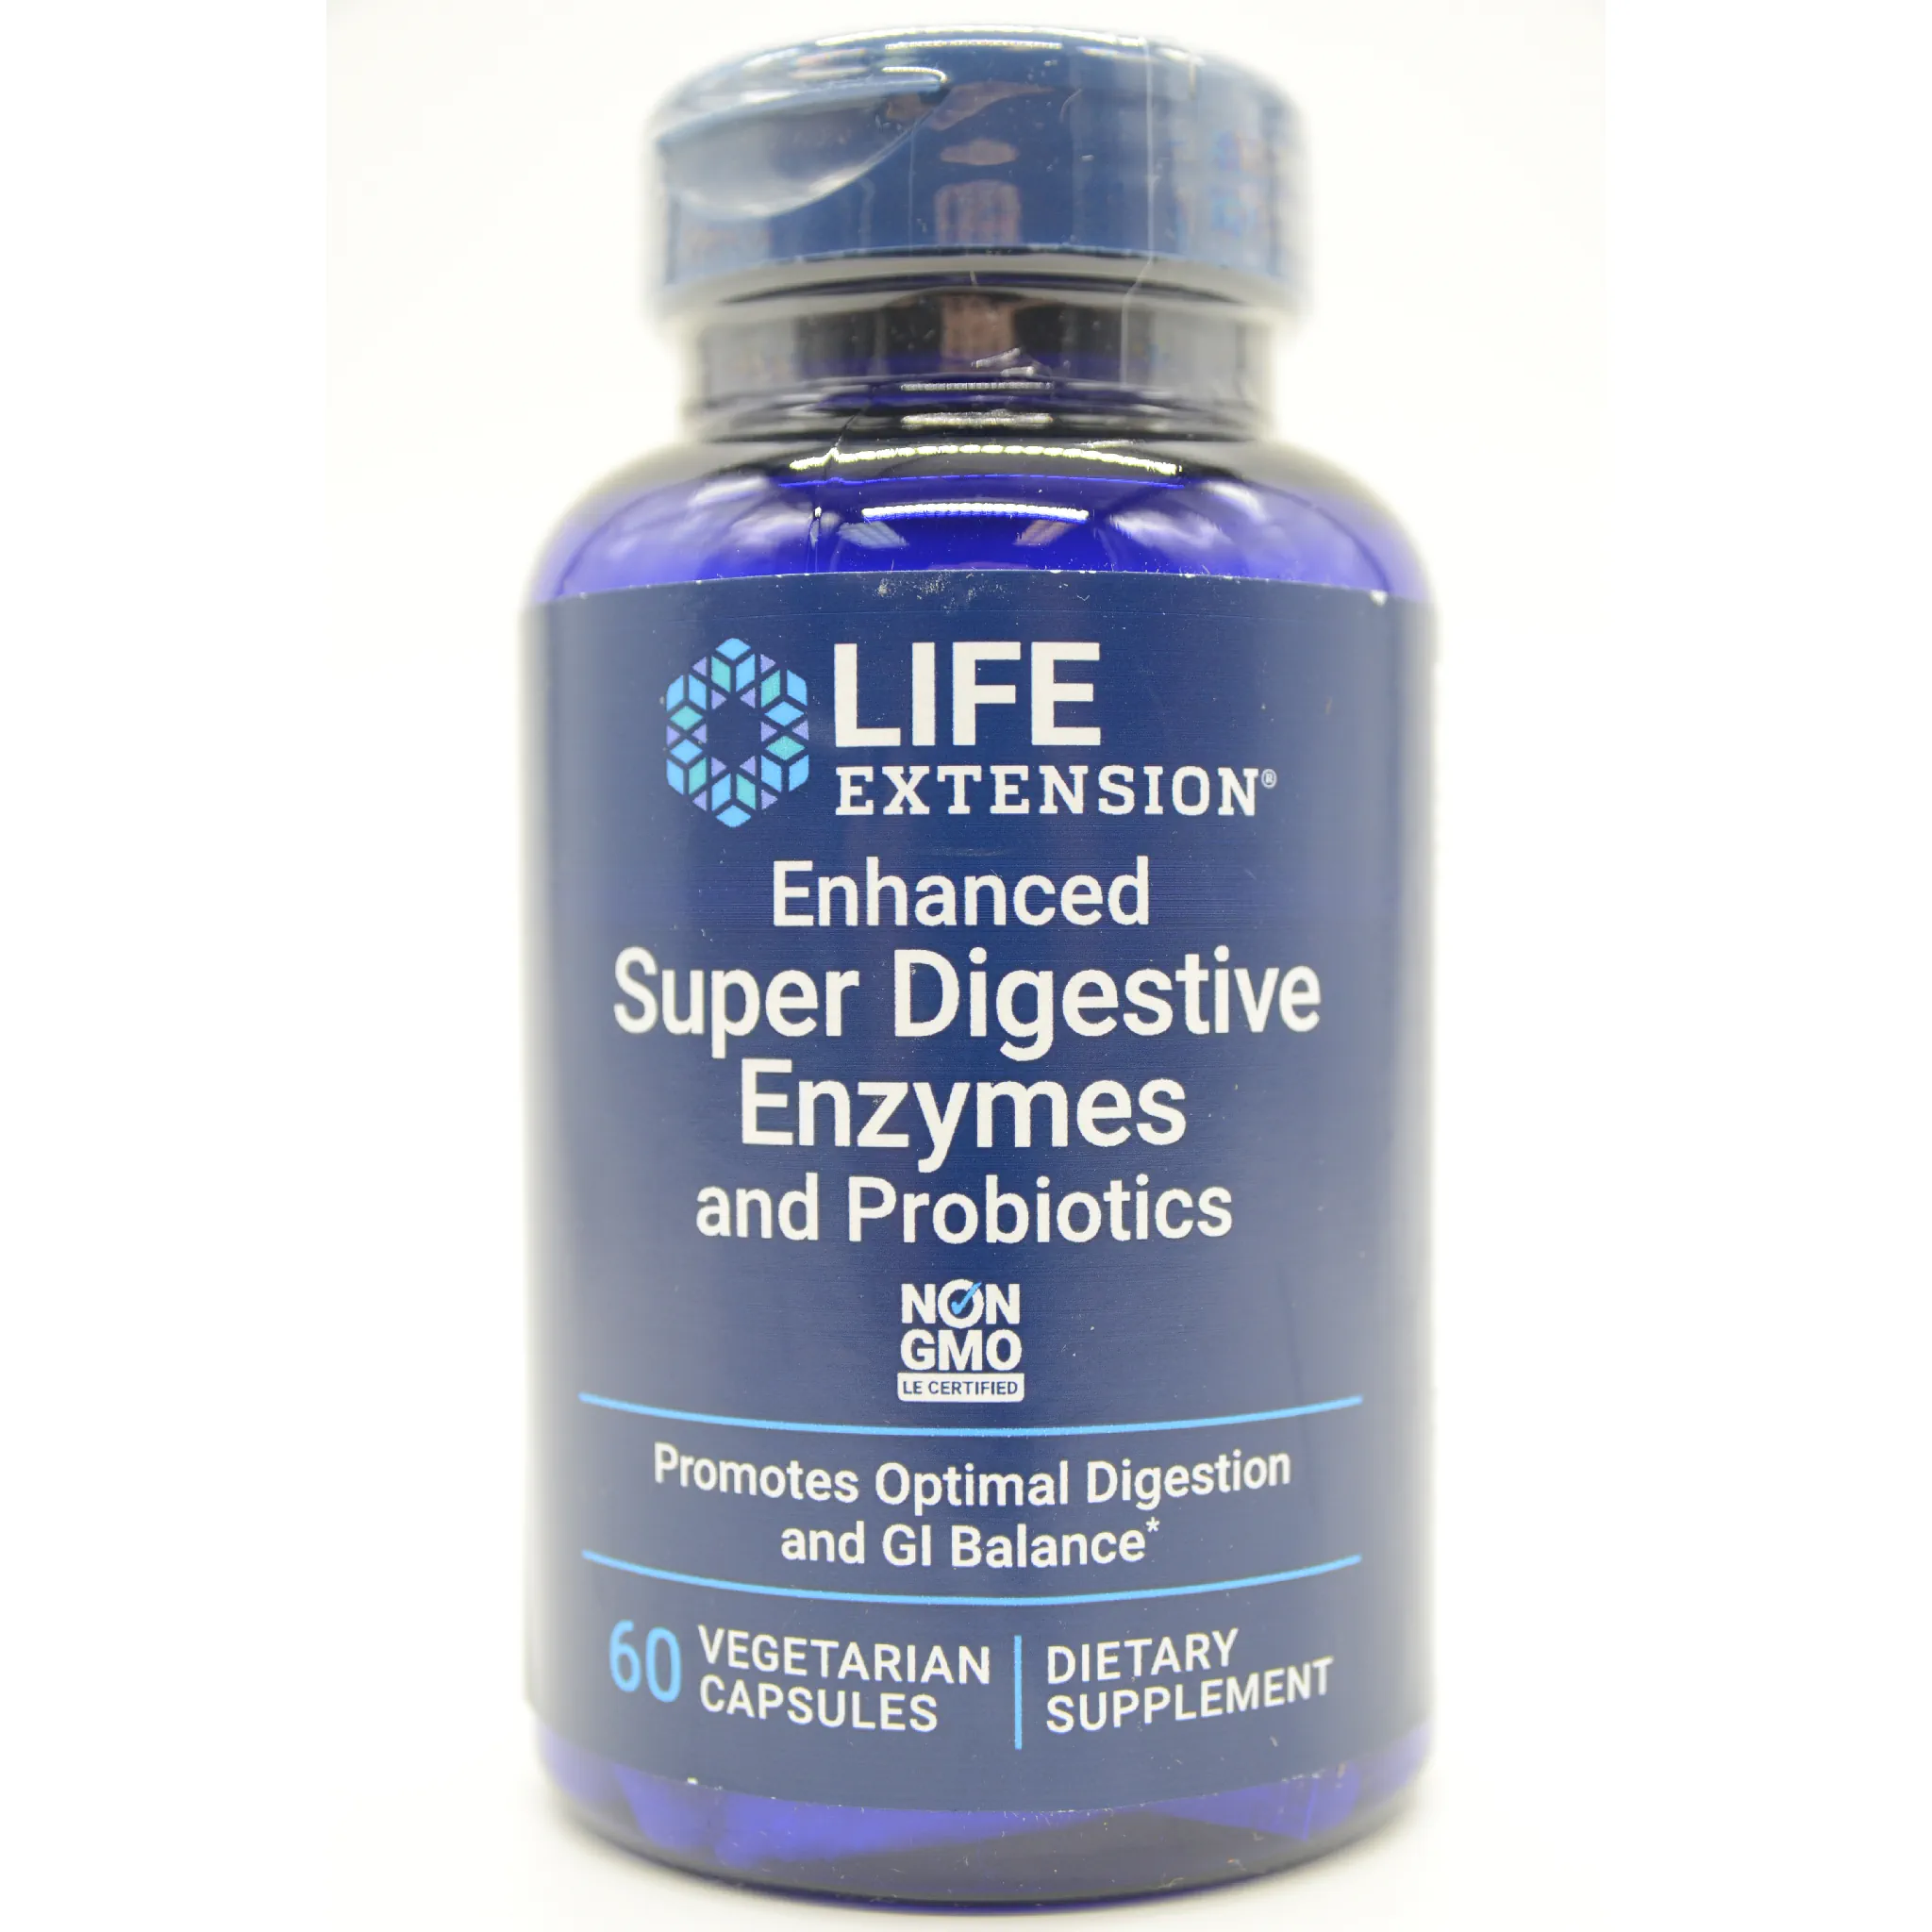 Life Extension - Digestive Enzymes W/ Probiotic